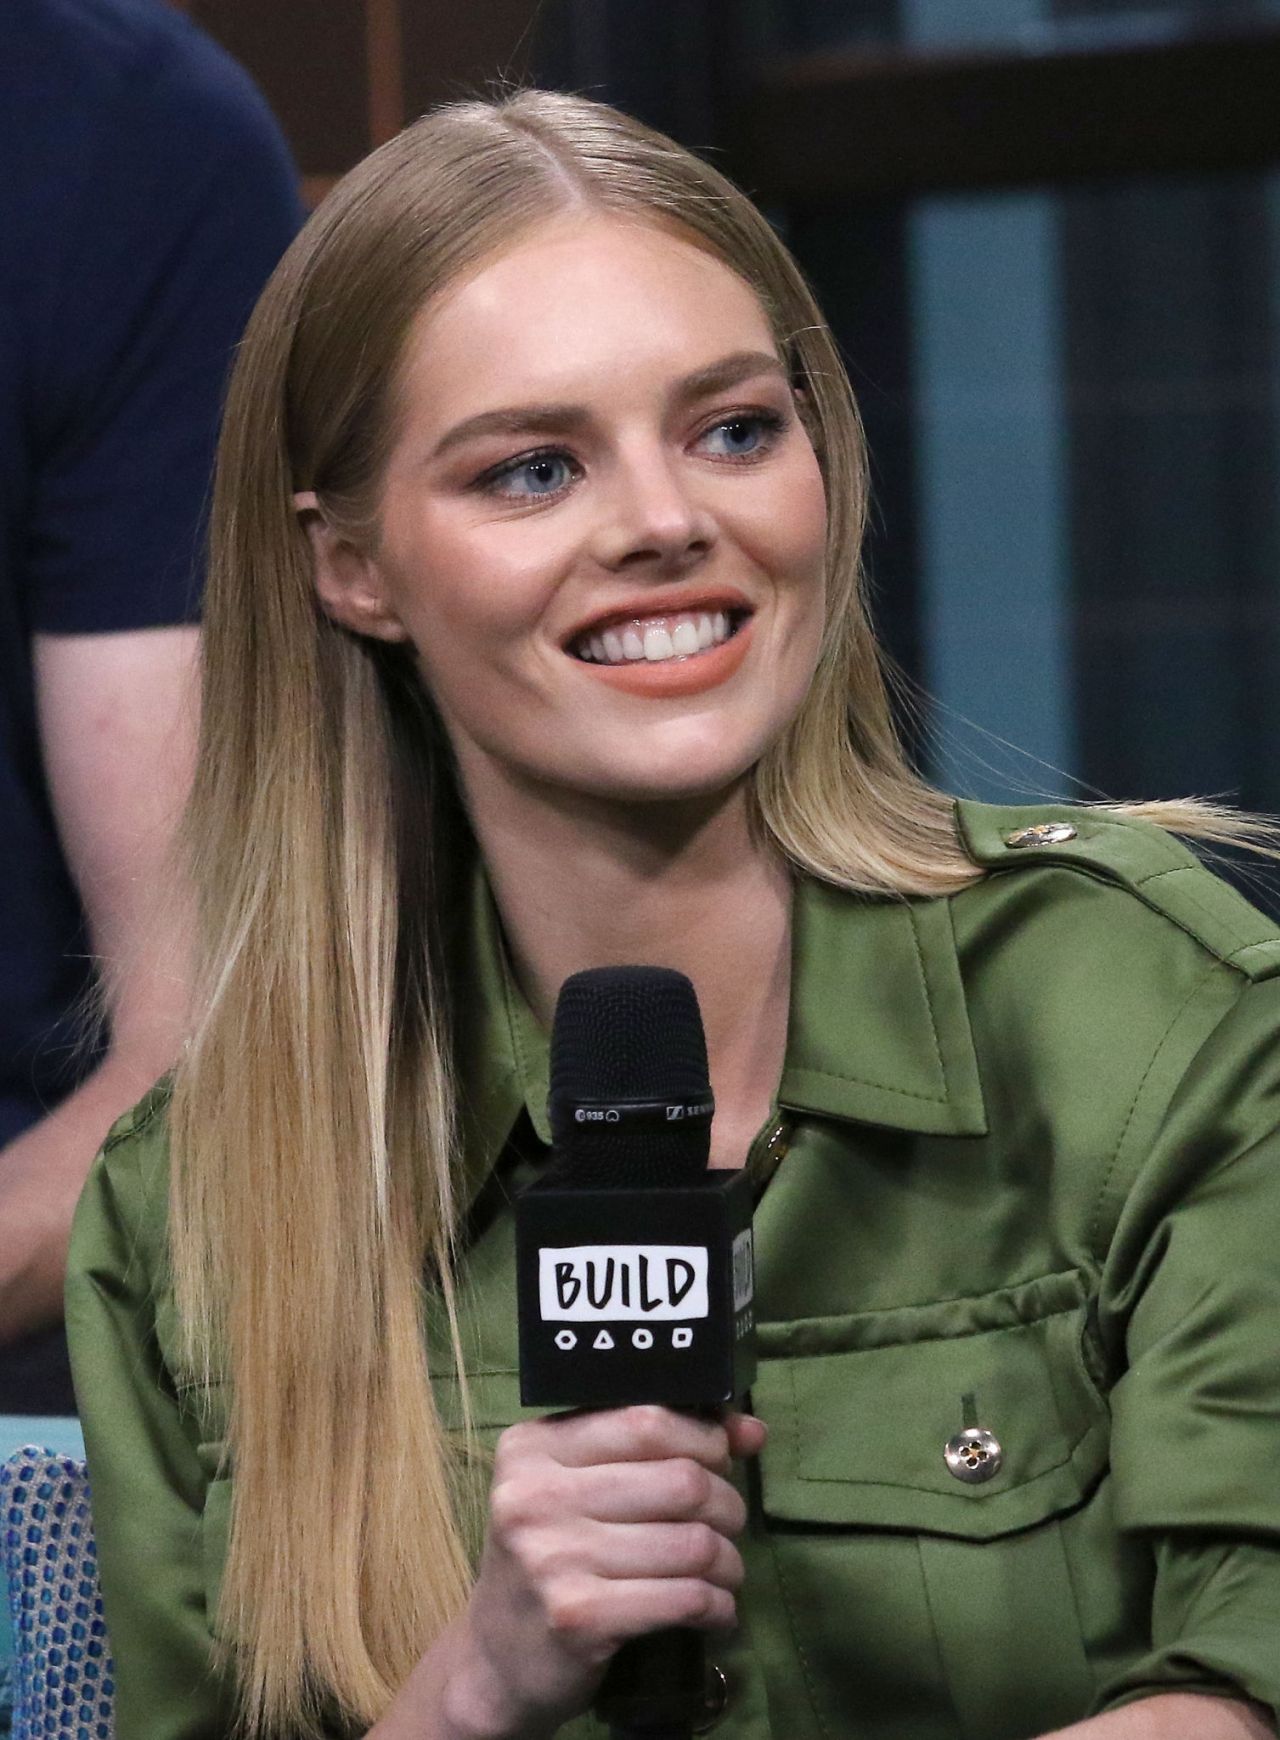 samara-weaving-discussing-ready-or-not-at-build-studio-in-nyc-08-22-2019-2.jpg